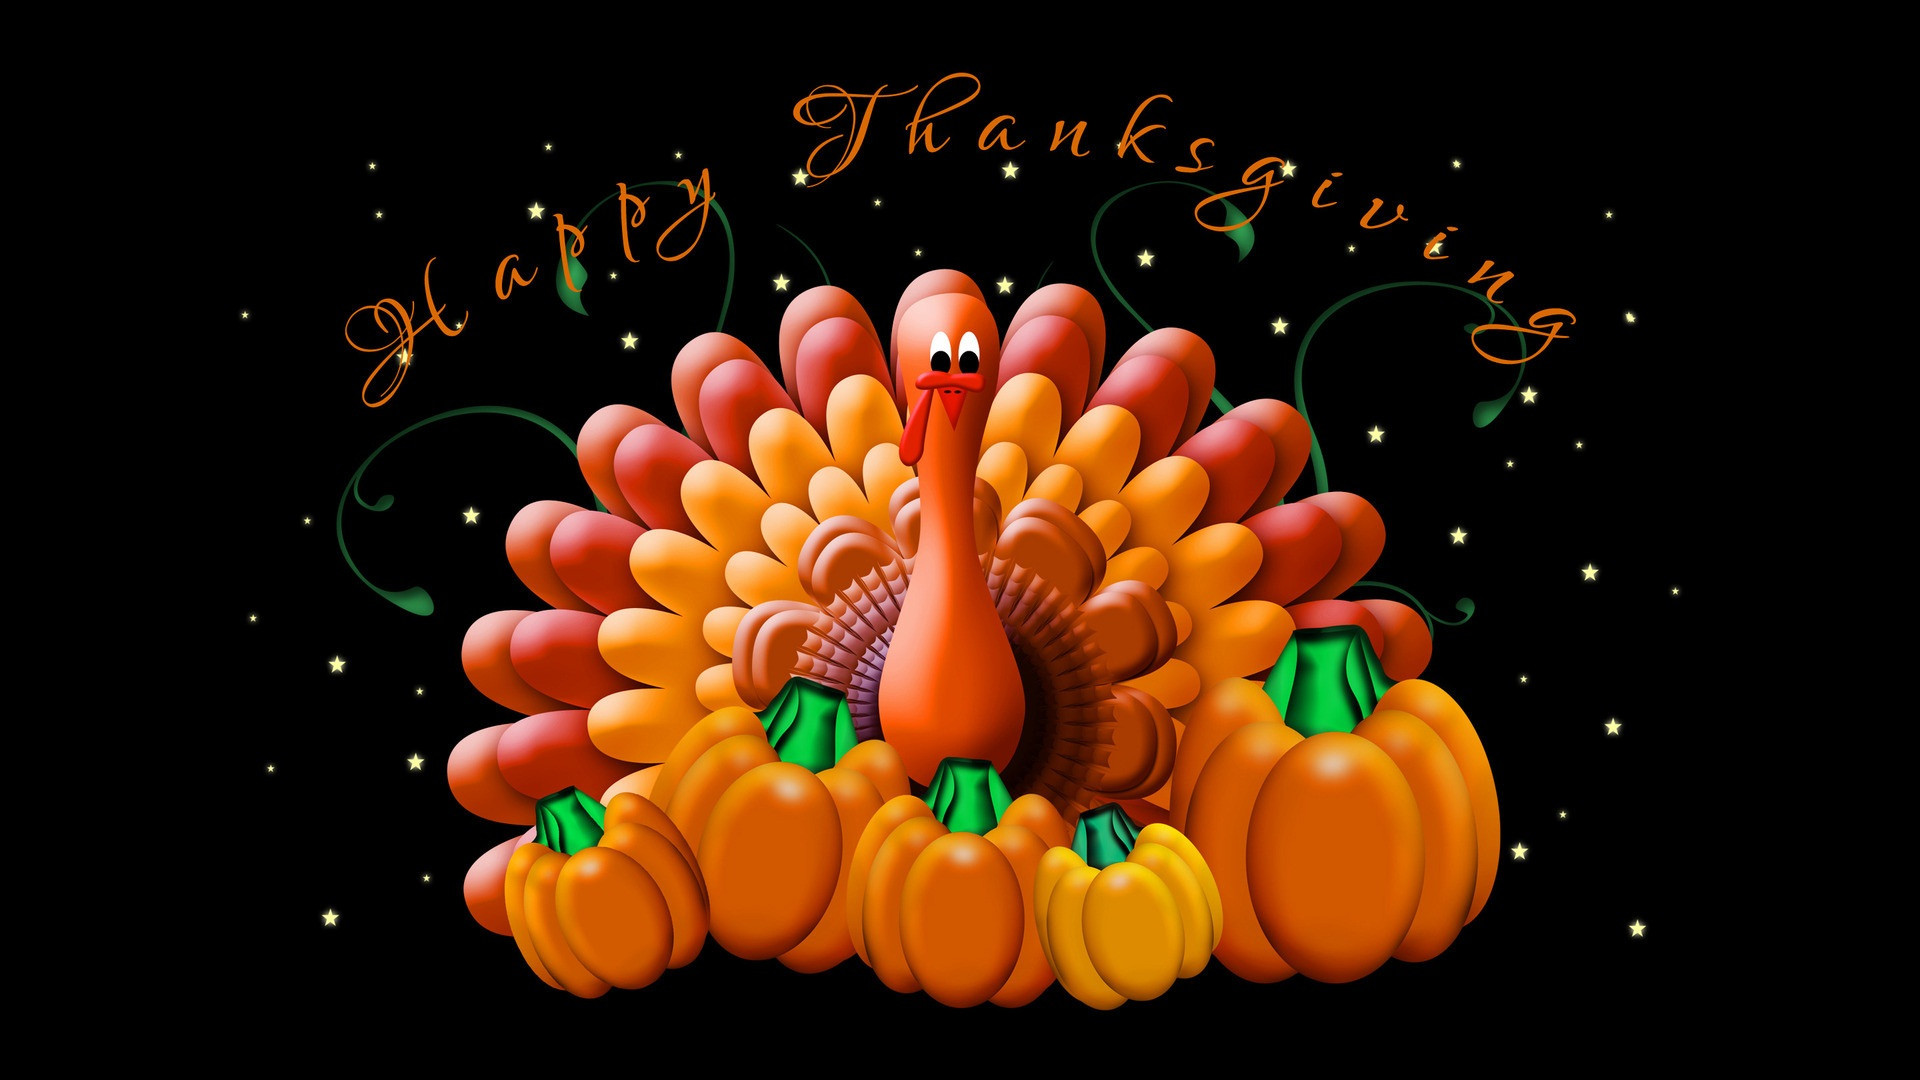 Free Turkey For Thanksgiving
 Download the Best Thanksgiving Wallpapers 2015 for Mobile